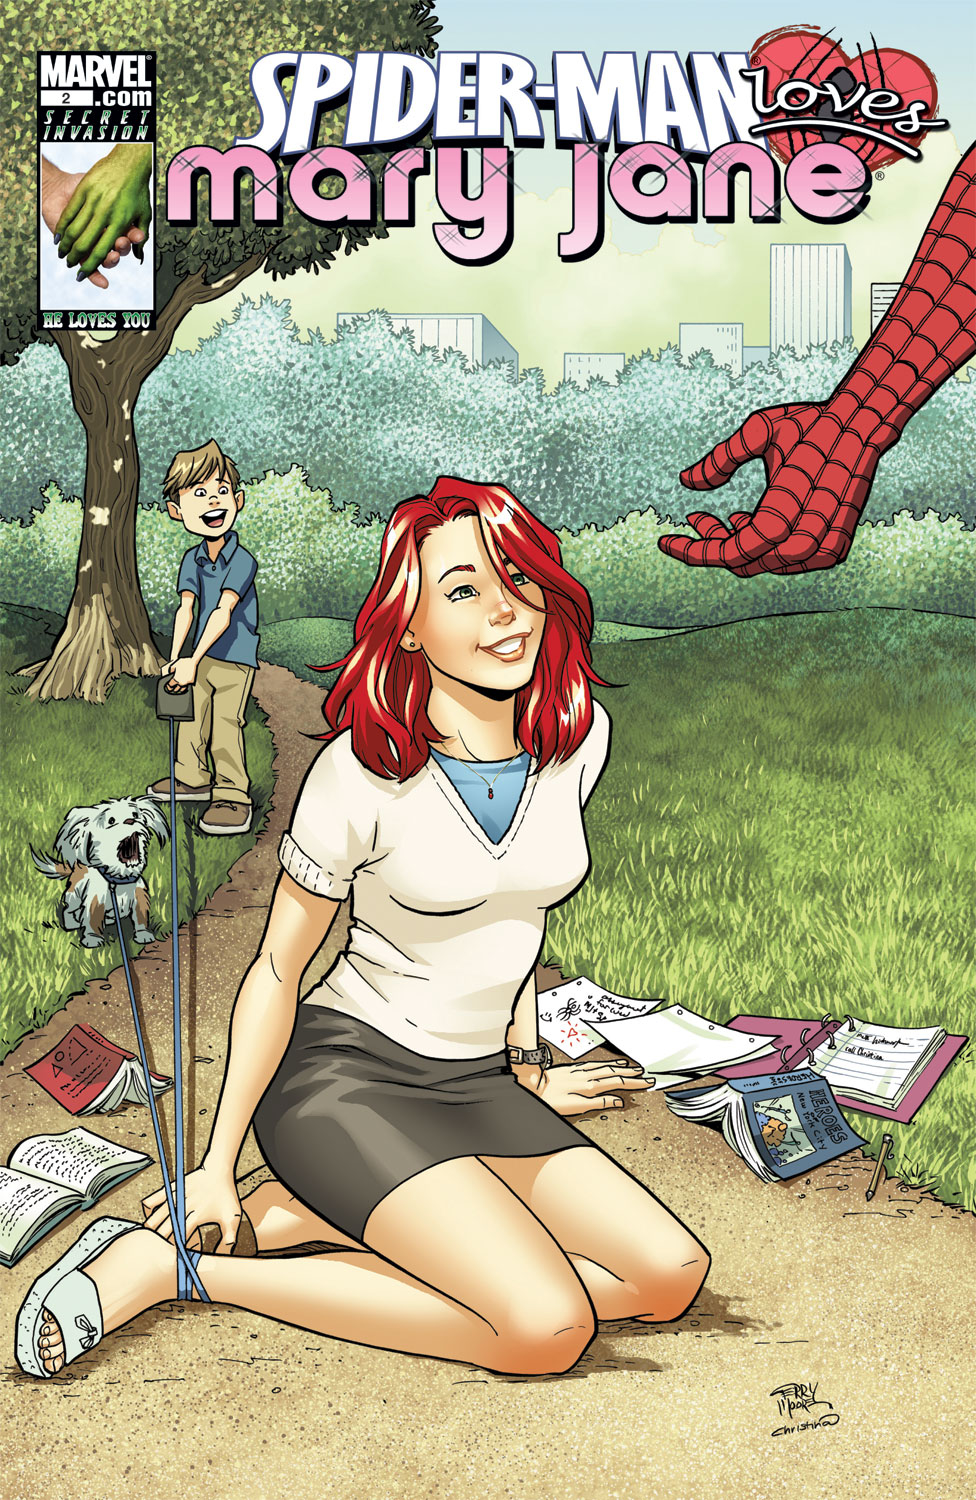 Spider-Man Loves Mary Jane Season 2 issue 2 - Page 1